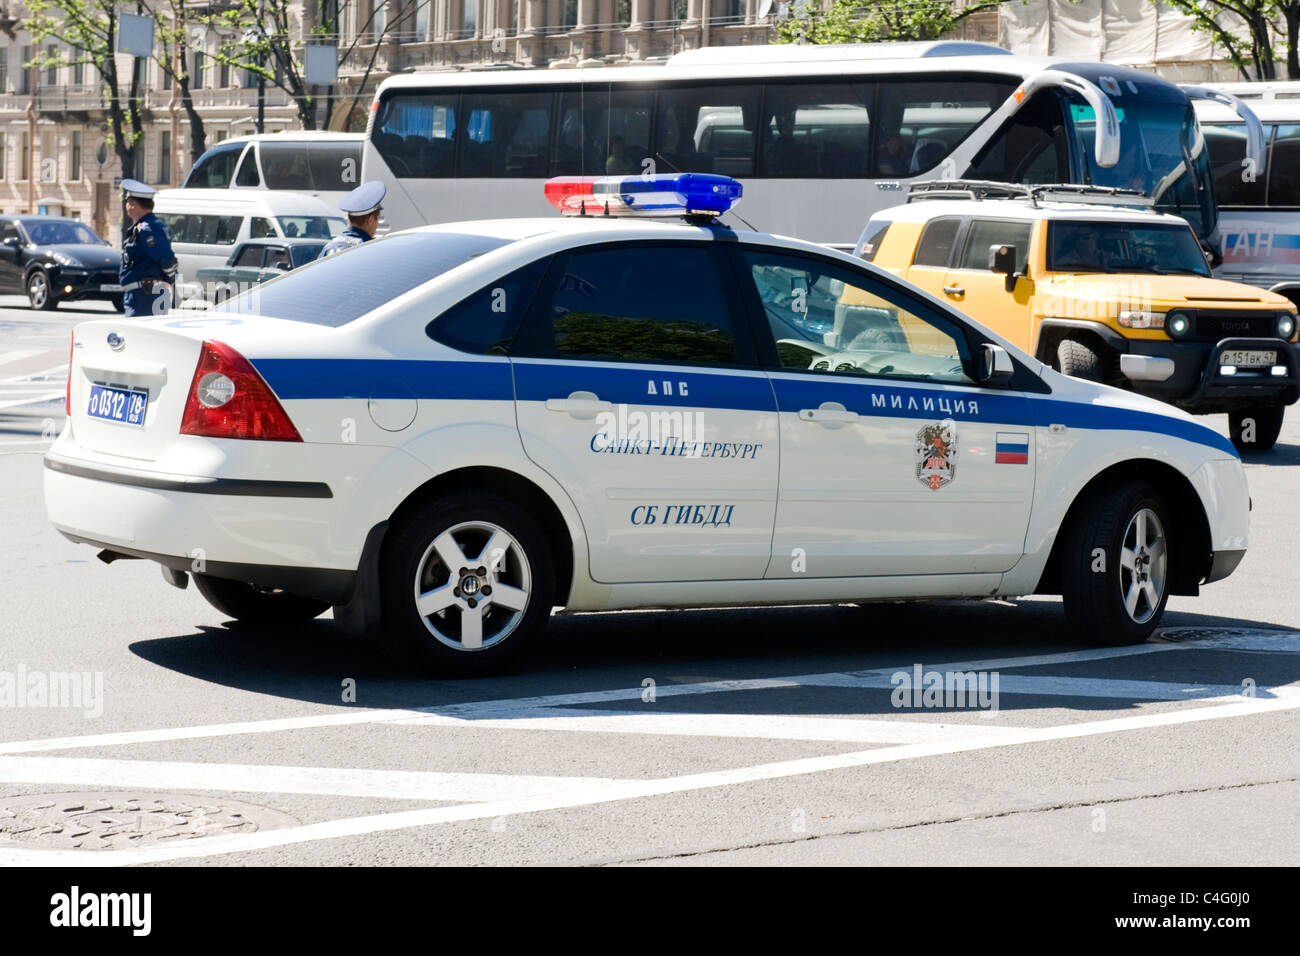 Russia St Petersburg Russian Ford new look police car traffic policeman in background street scene cars traffic trees Stock Photo